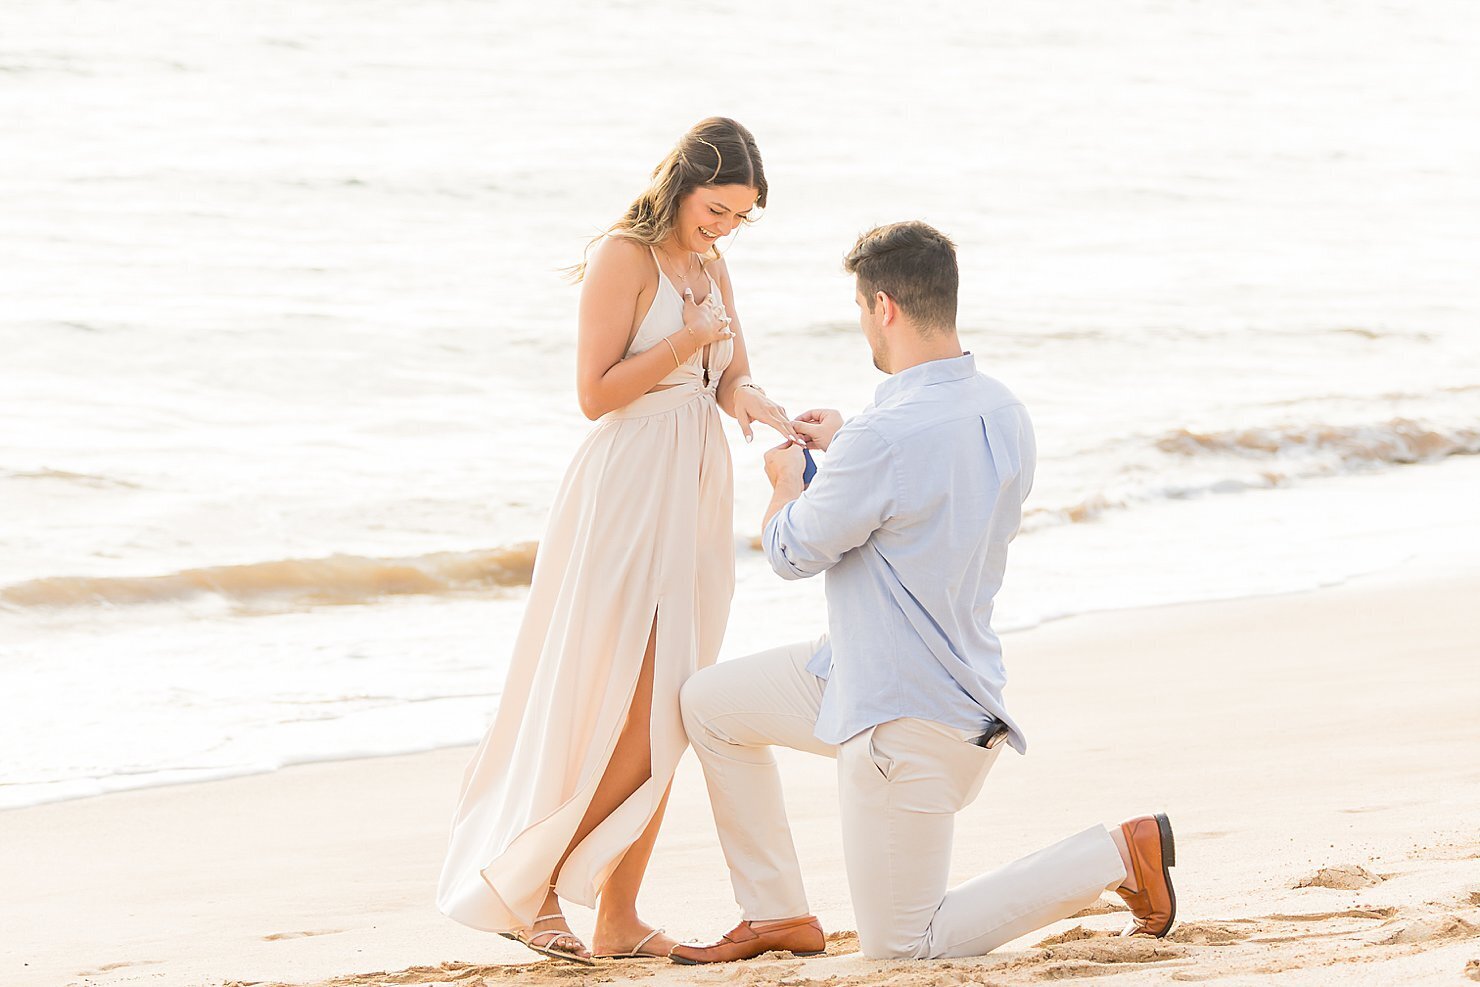 Hawaii proposal with man down on one knee